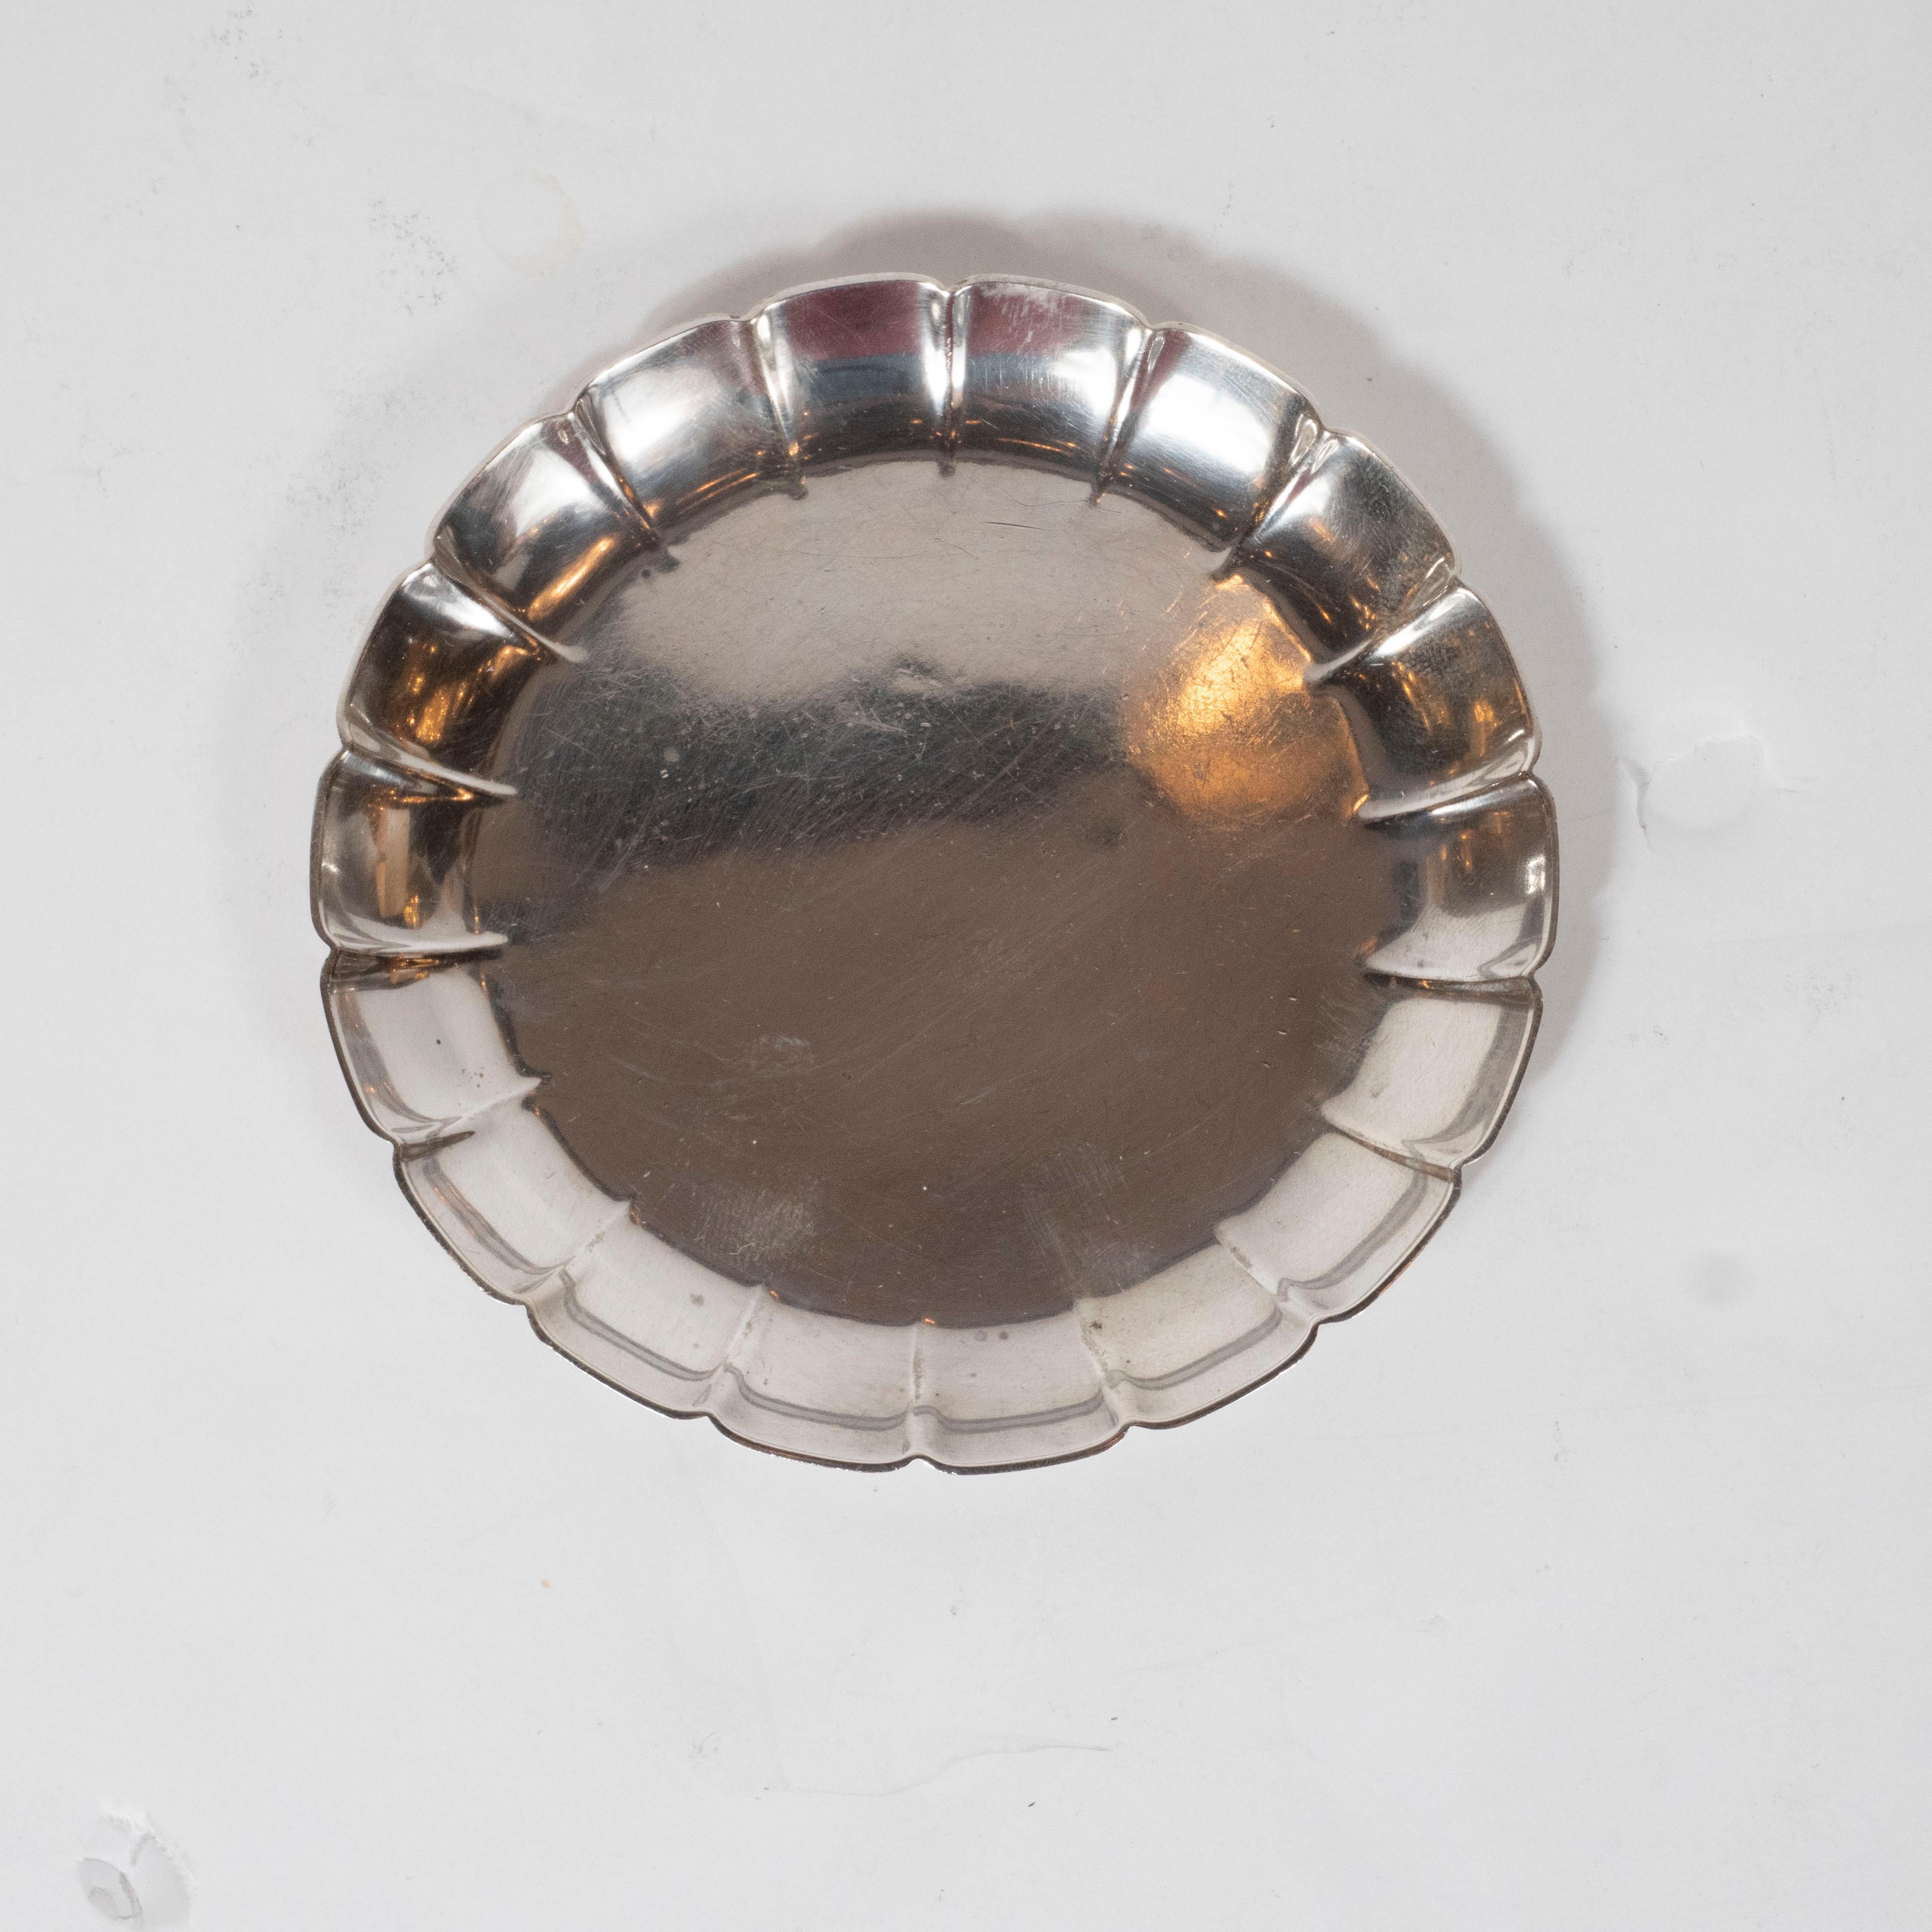 This elegant Art Deco sterling silver dish was realized by the esteemed American maker Tiffany & Co., circa 1920. It features a round body with raised and scalloped sides, separated by ridges in relief. With its beautiful quality and clean modernist